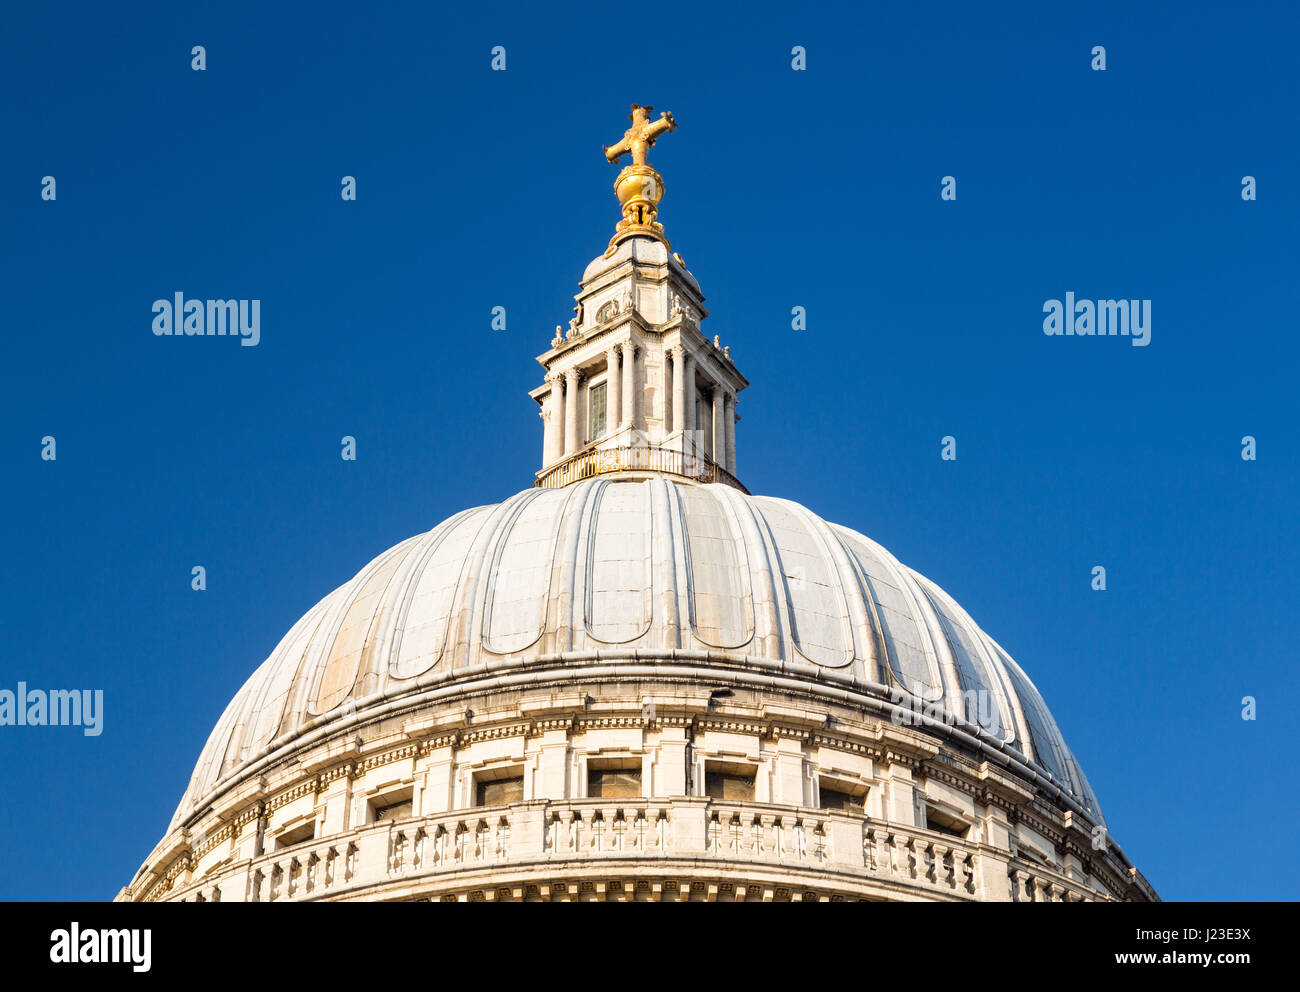 Dome of St Pauls Cathedral in London, England, UK Stock Photo